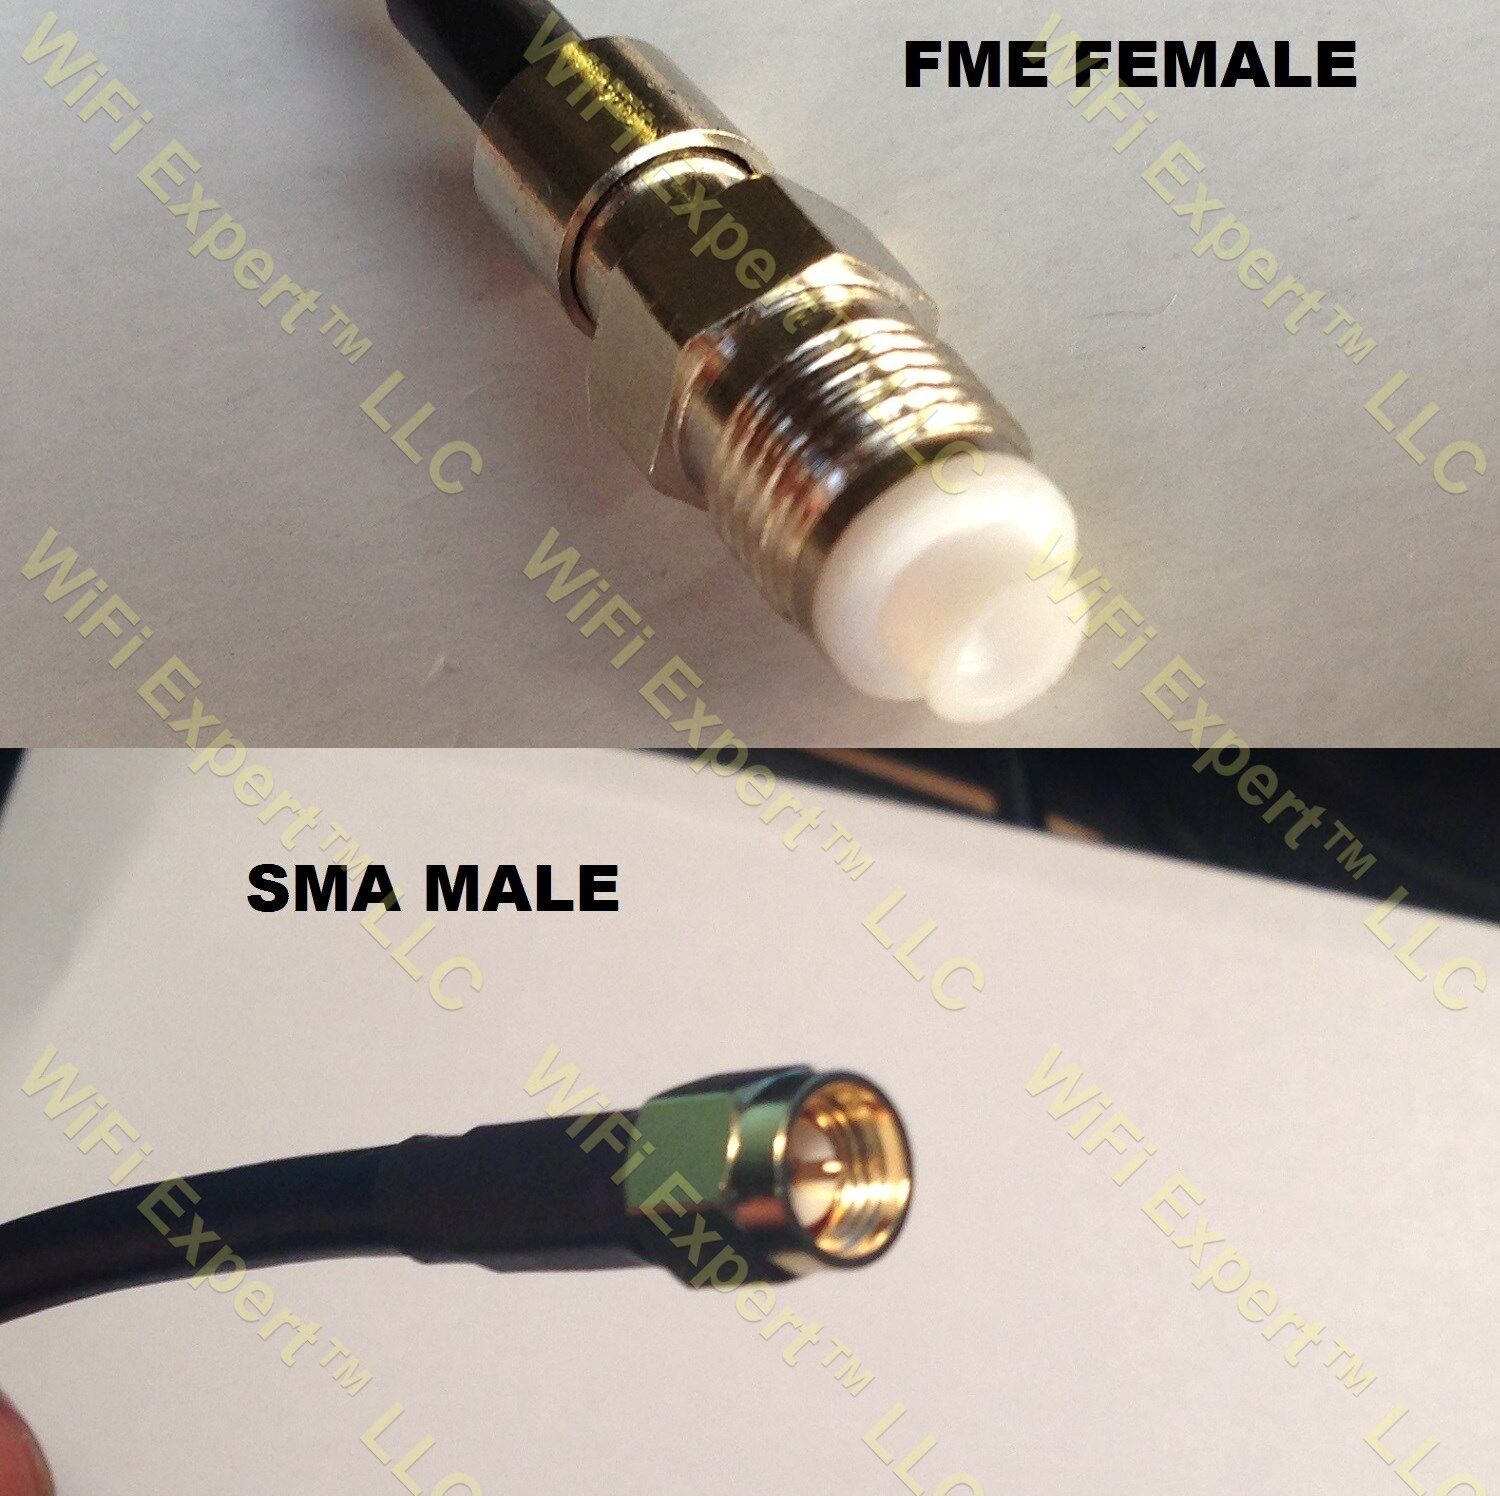 1 x FME Female to SMA MALE RF pigtail COAX Cable RG316 4-20inch USA Assembled